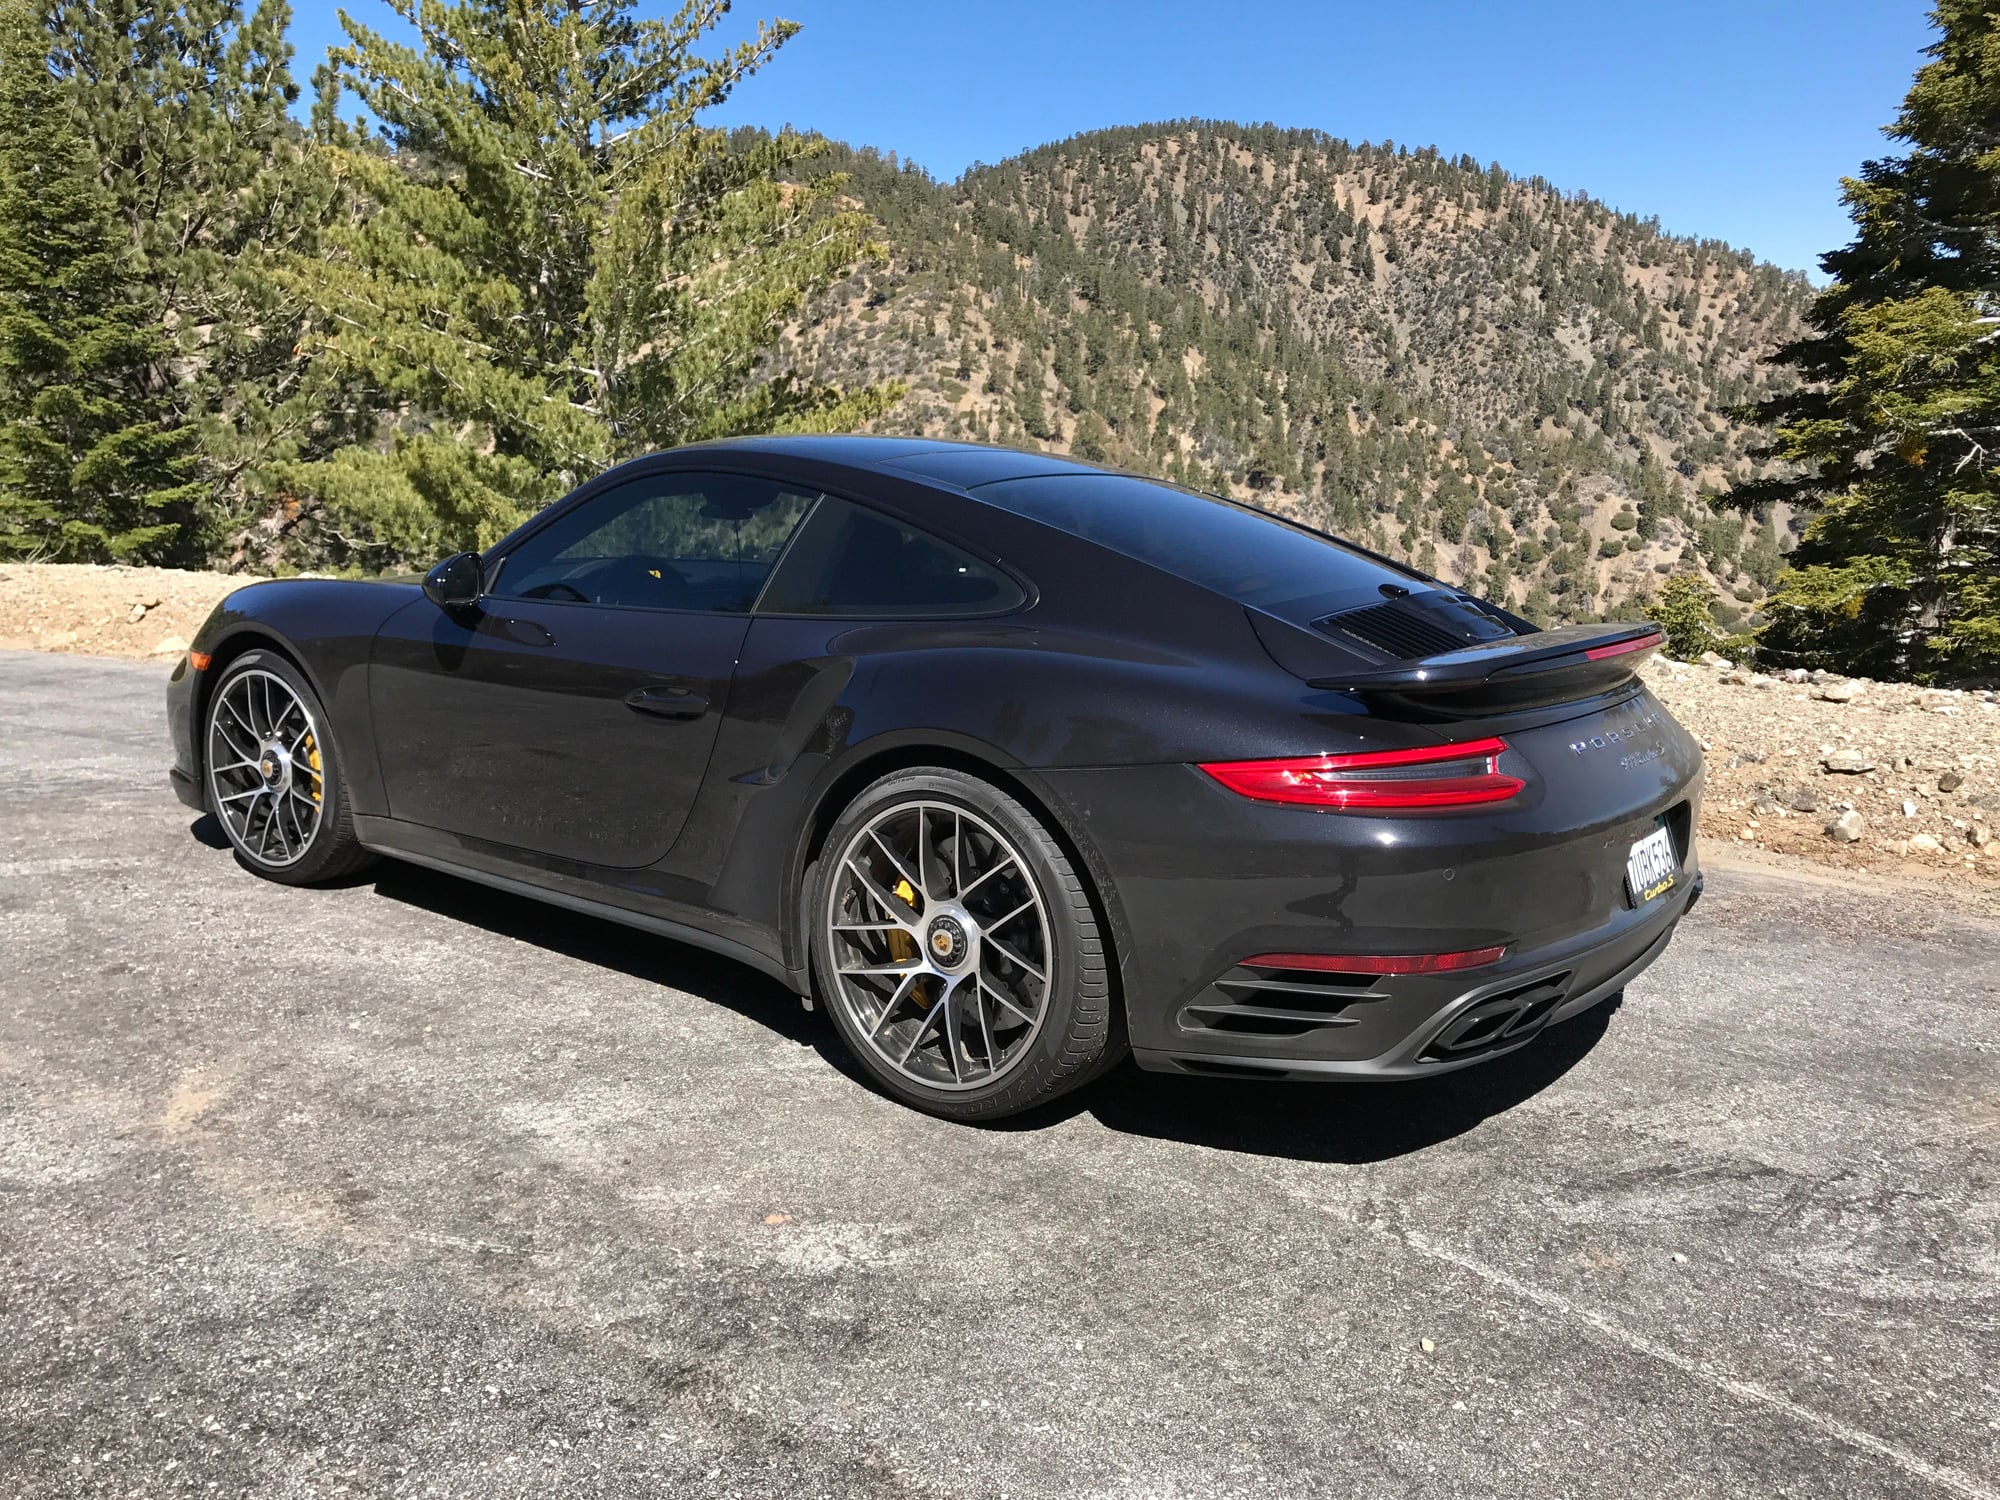 2017 Porsche 911 - 2017 Porsche 911 Turbo S Coupe 991.2 - Used - VIN WP0AD2A91HS166528 - 6,200 Miles - 6 cyl - AWD - Automatic - Coupe - Black - Pasadena, CA 91107, United States